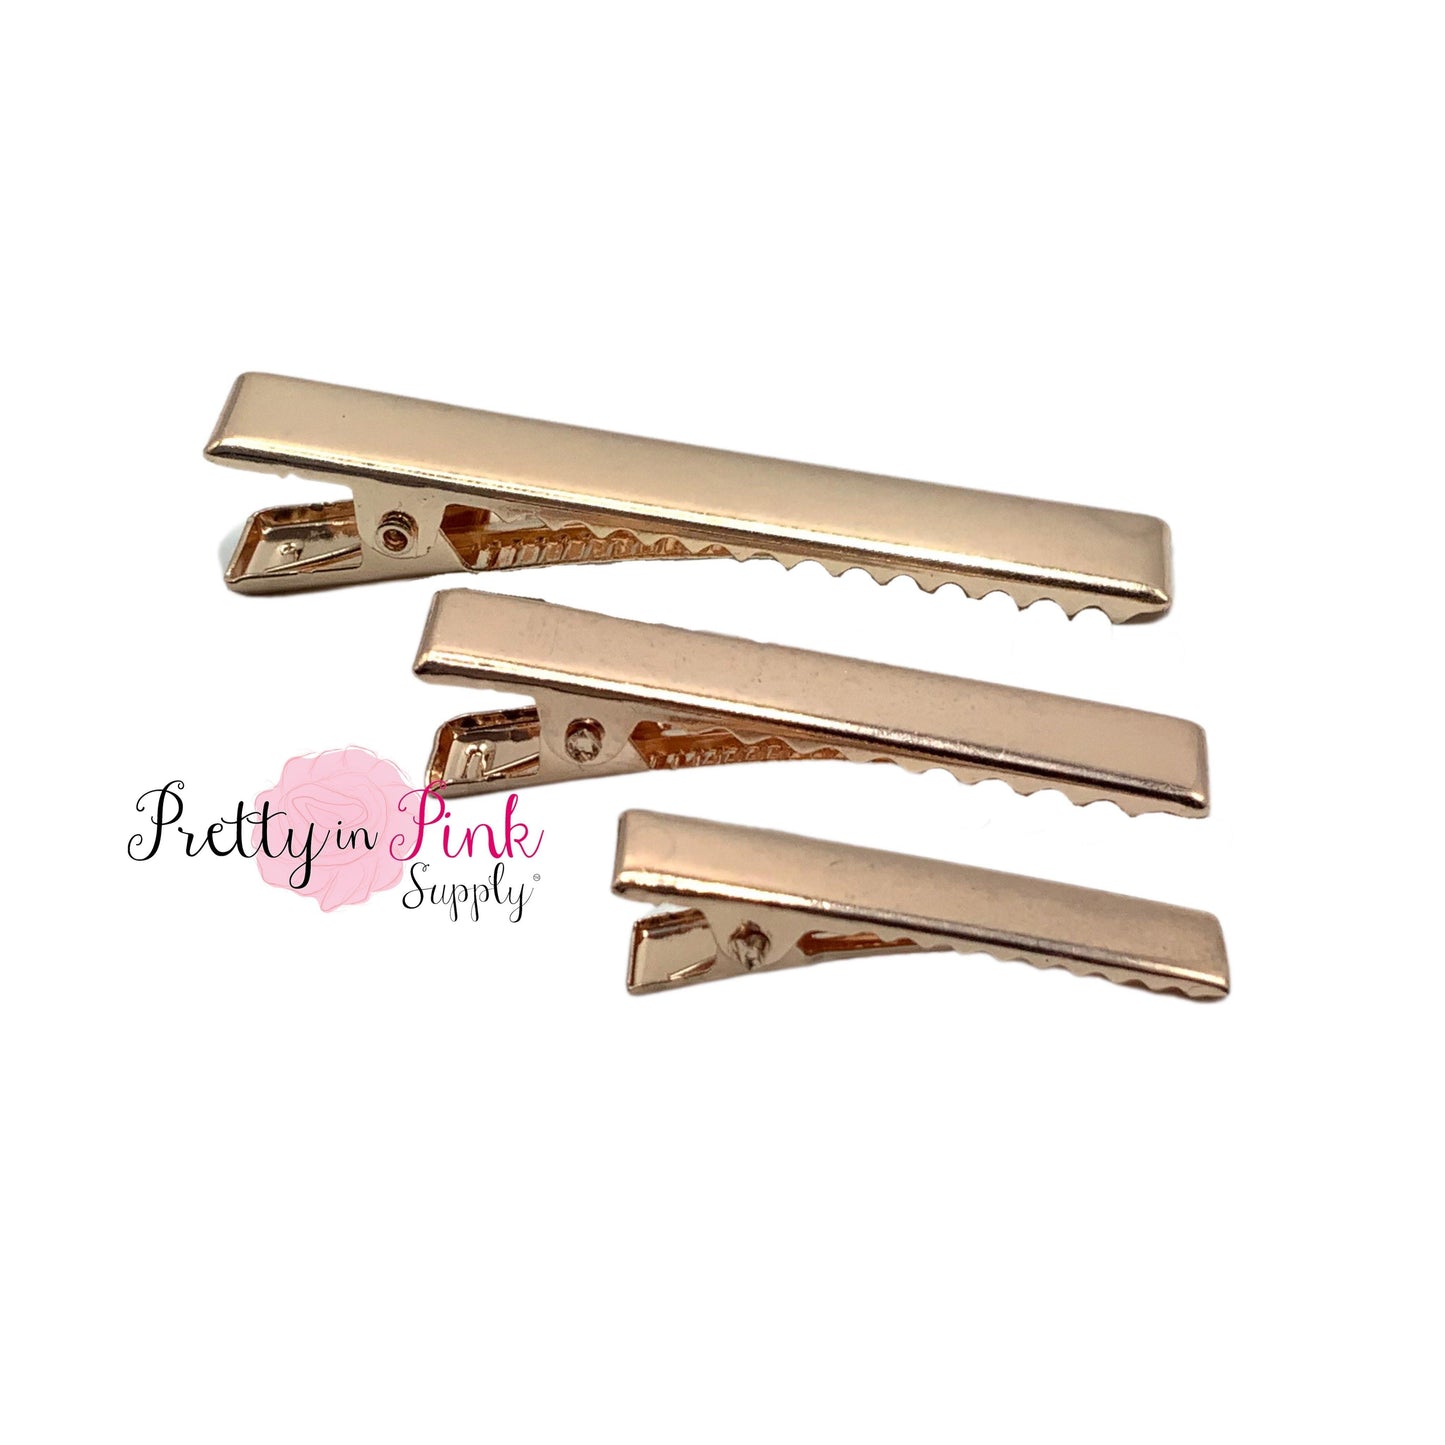 Group photo of Rose Gold alligator clips including sizes 2.375in., 1.75in., and 1.25in. top to bottom.